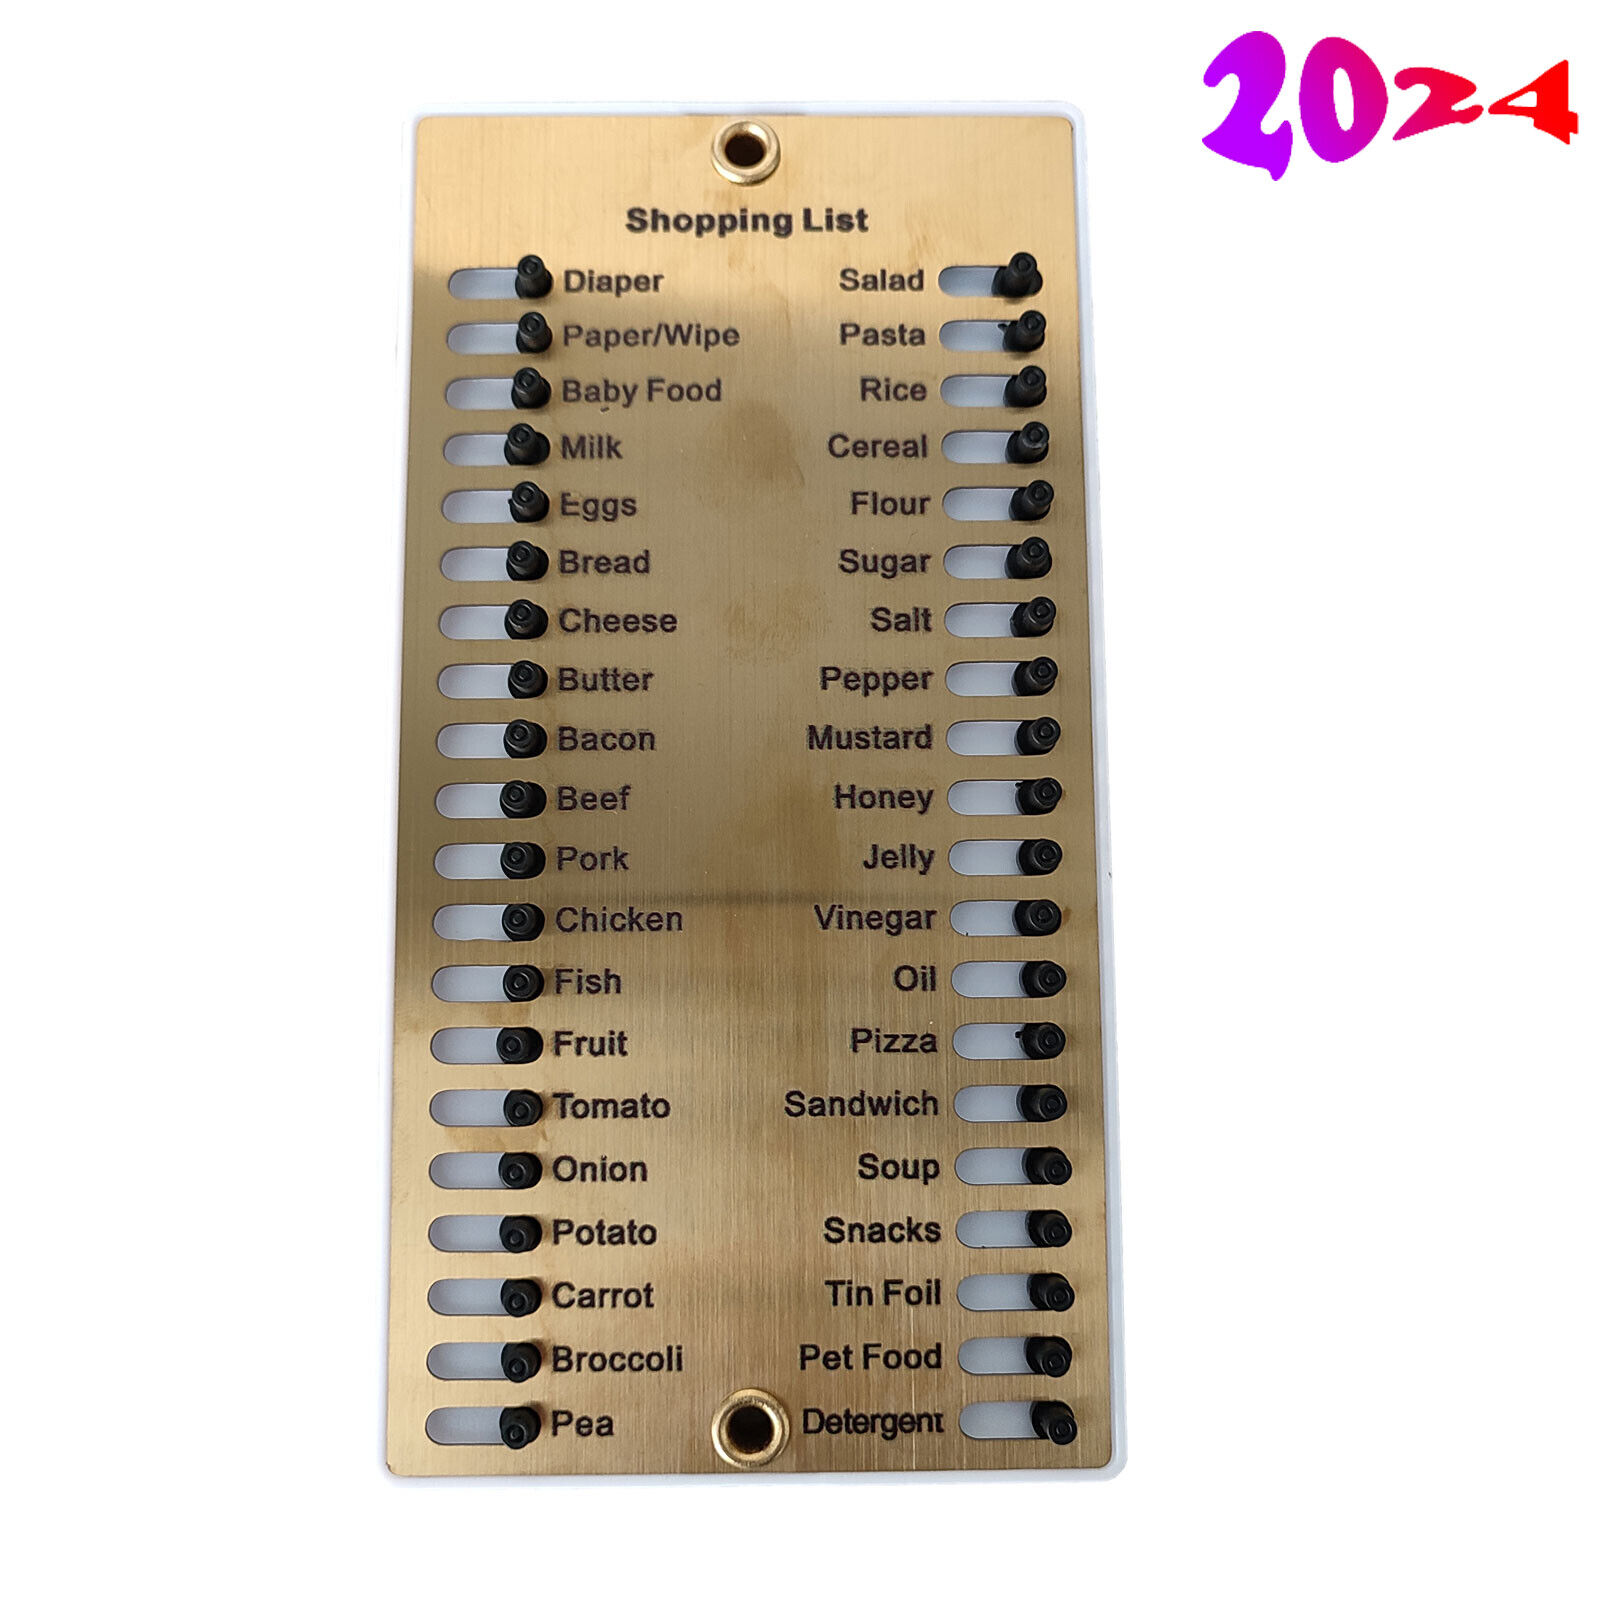 Shopping List Memory Reminder Board, Reusable Shopping List, Grocery List US